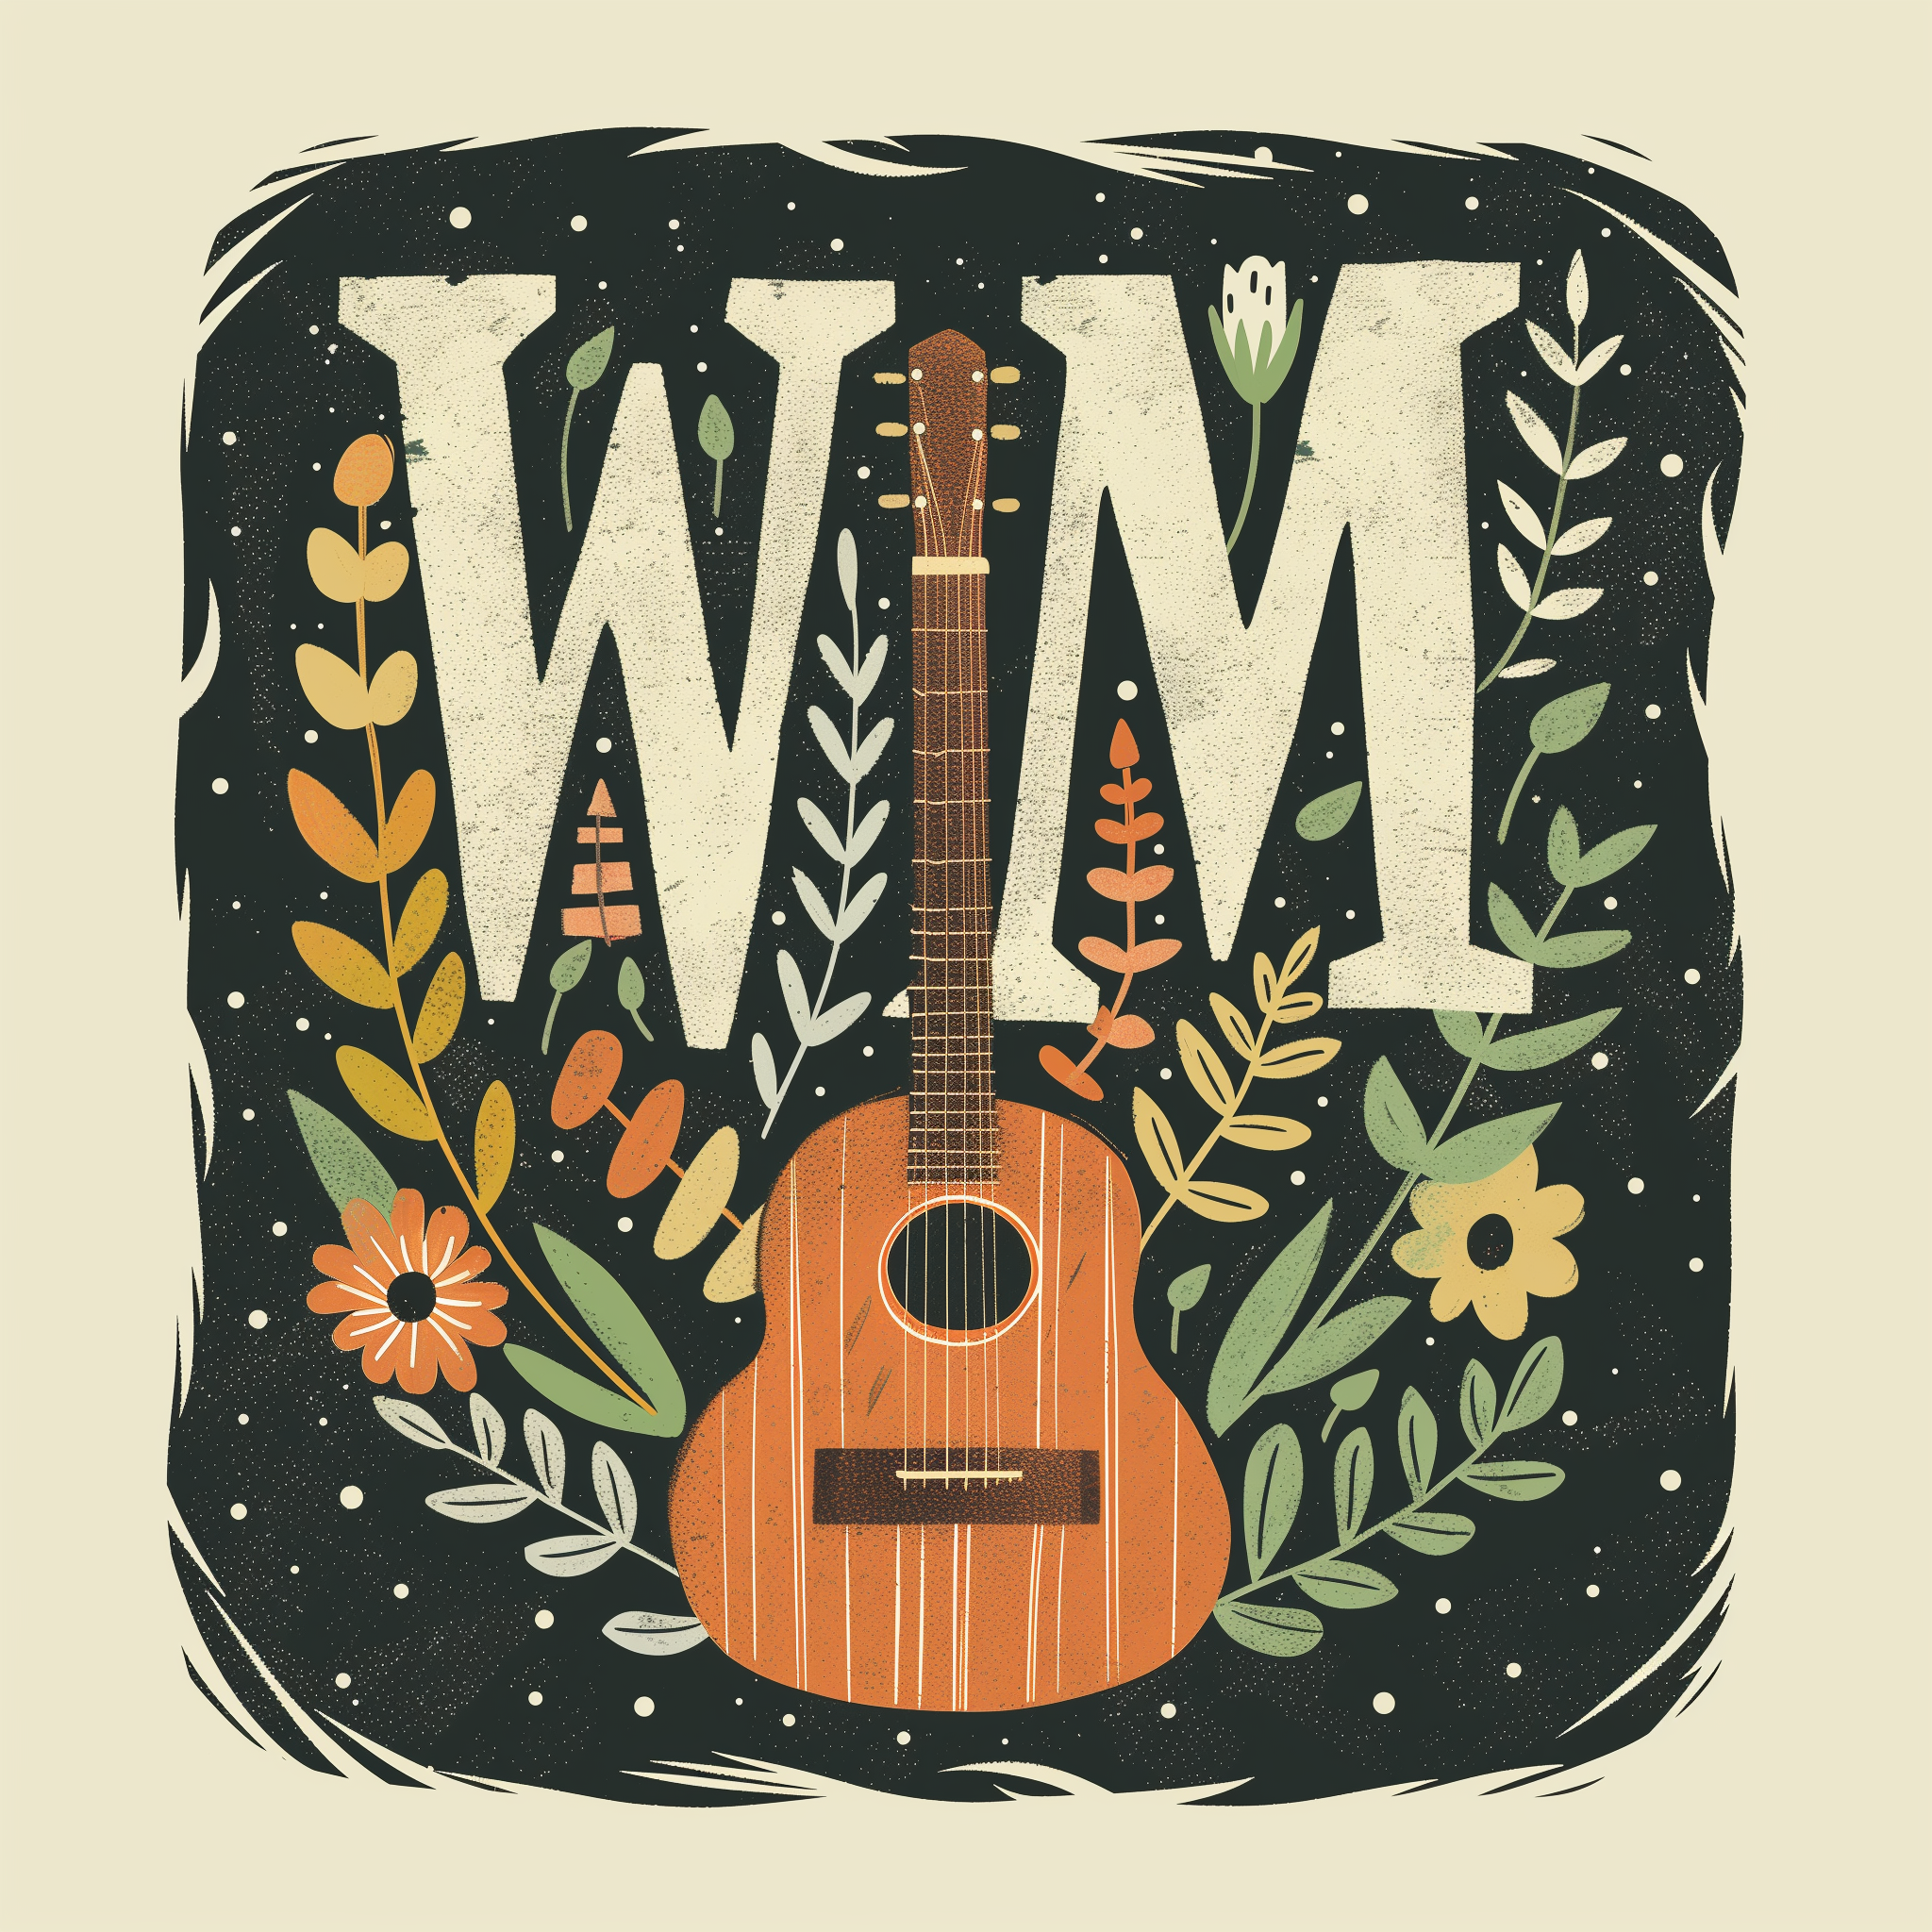 p_mow_vector_image_of_a_indie_folk_band_logo_using_the_letters__a78538ea-9569-4db6-93fb-0205ce41a2f3.PNG